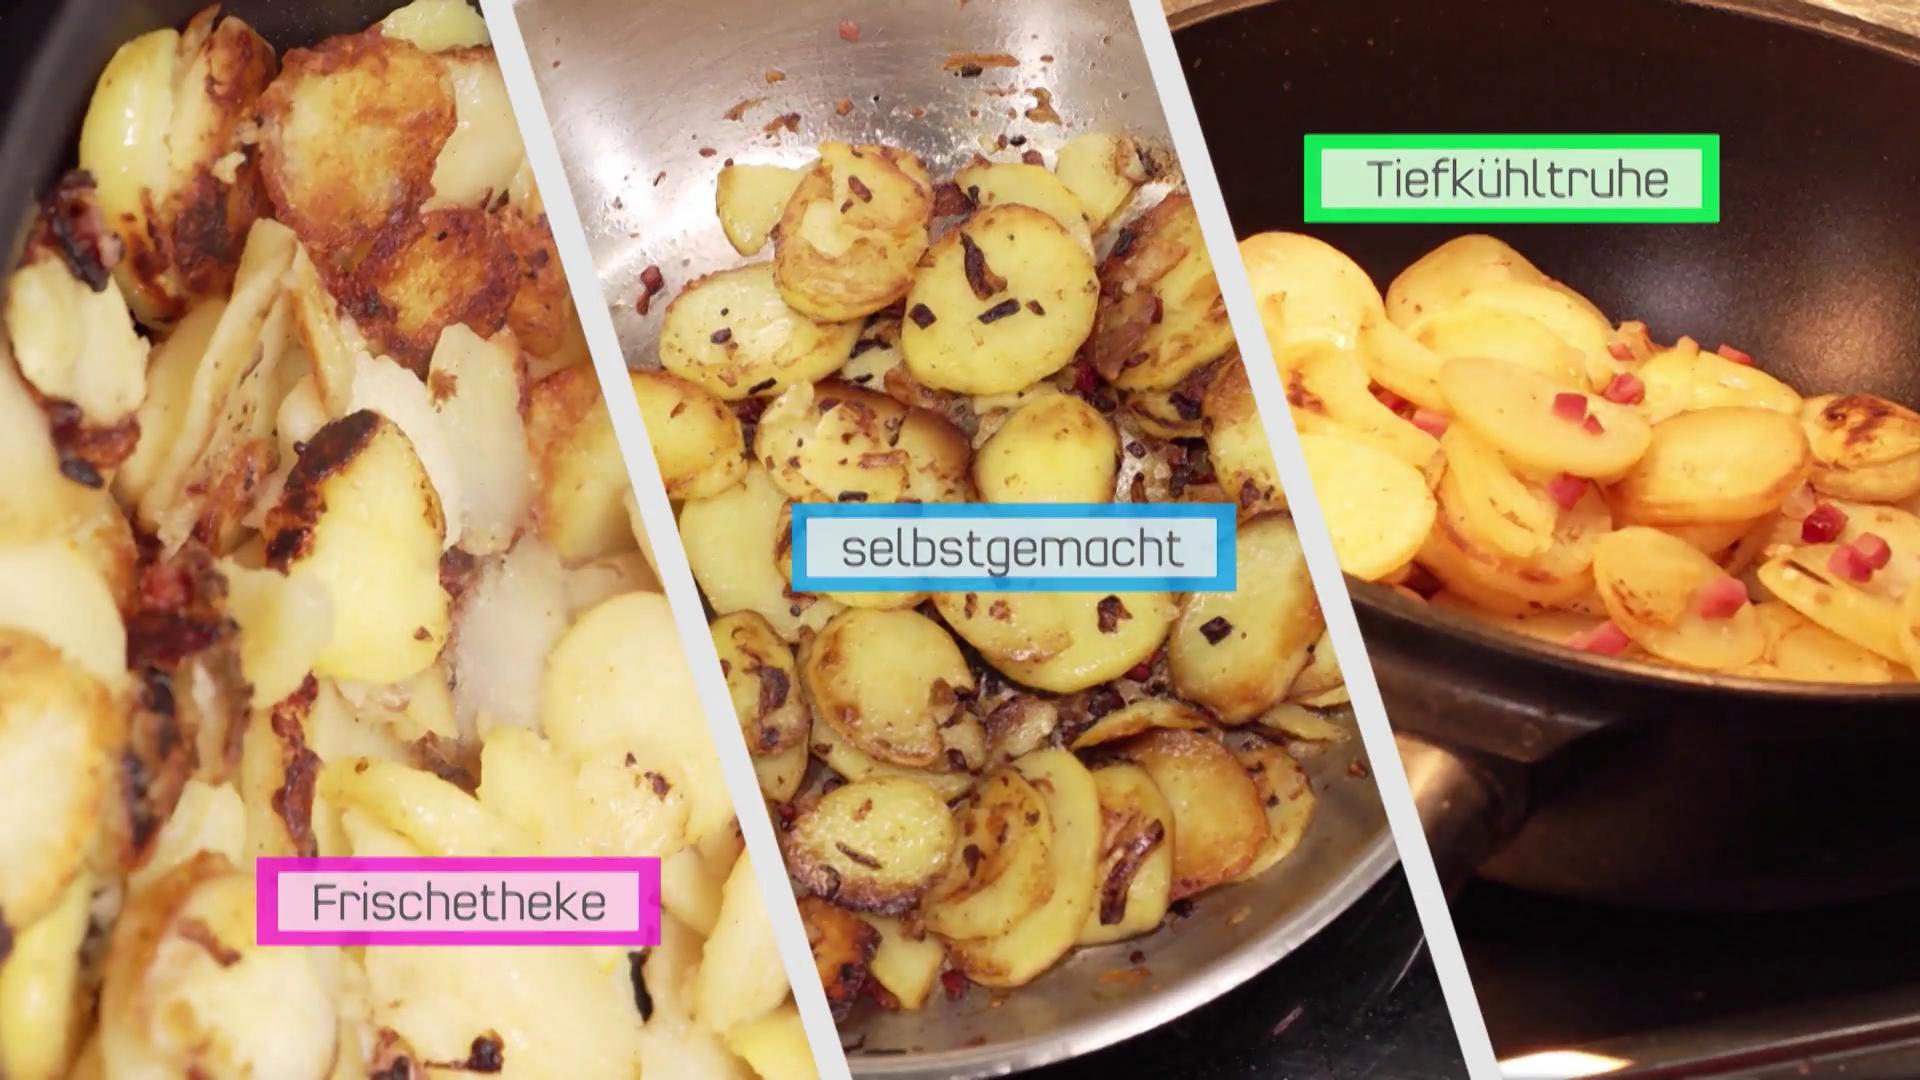 Tested ready-made fried potatoes Are they as tasty as homemade?